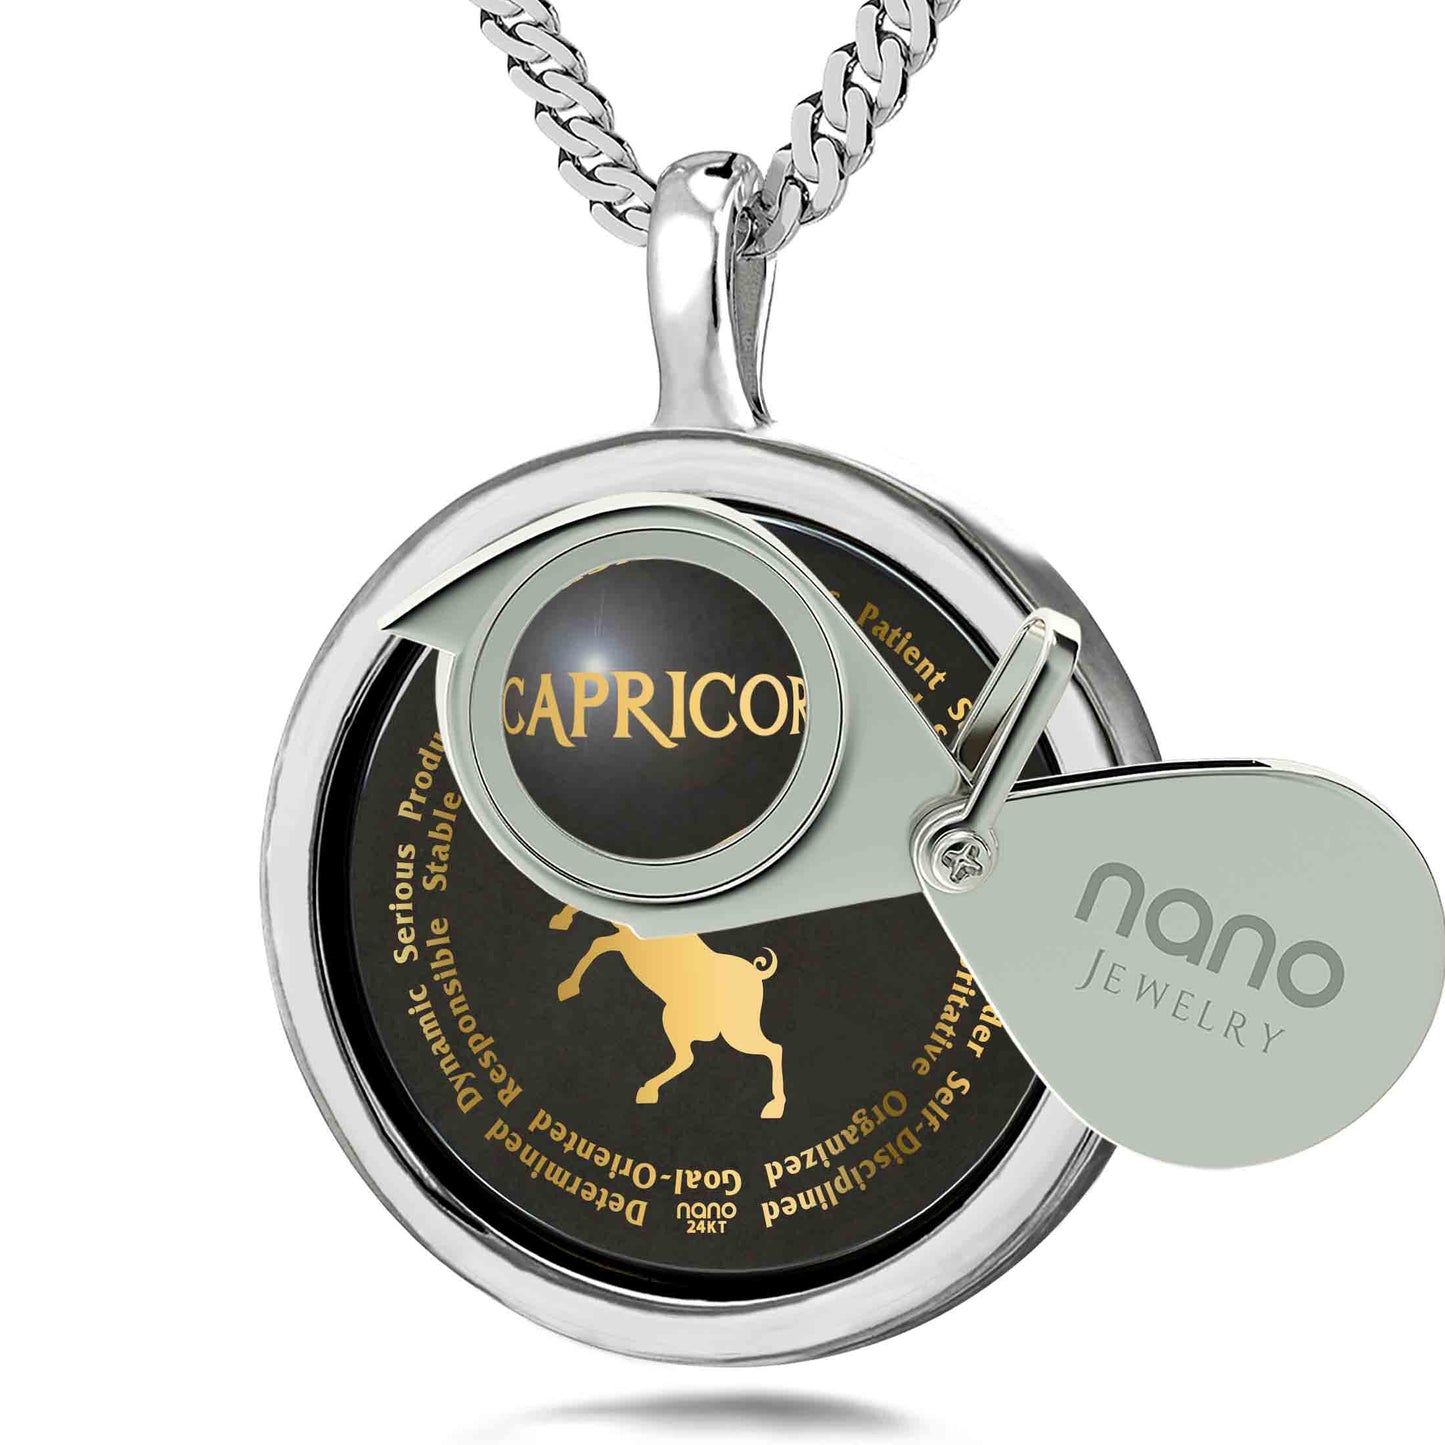 Capricorn Necklaces for Lovers of the Zodiac 24k Gold Inscribed*